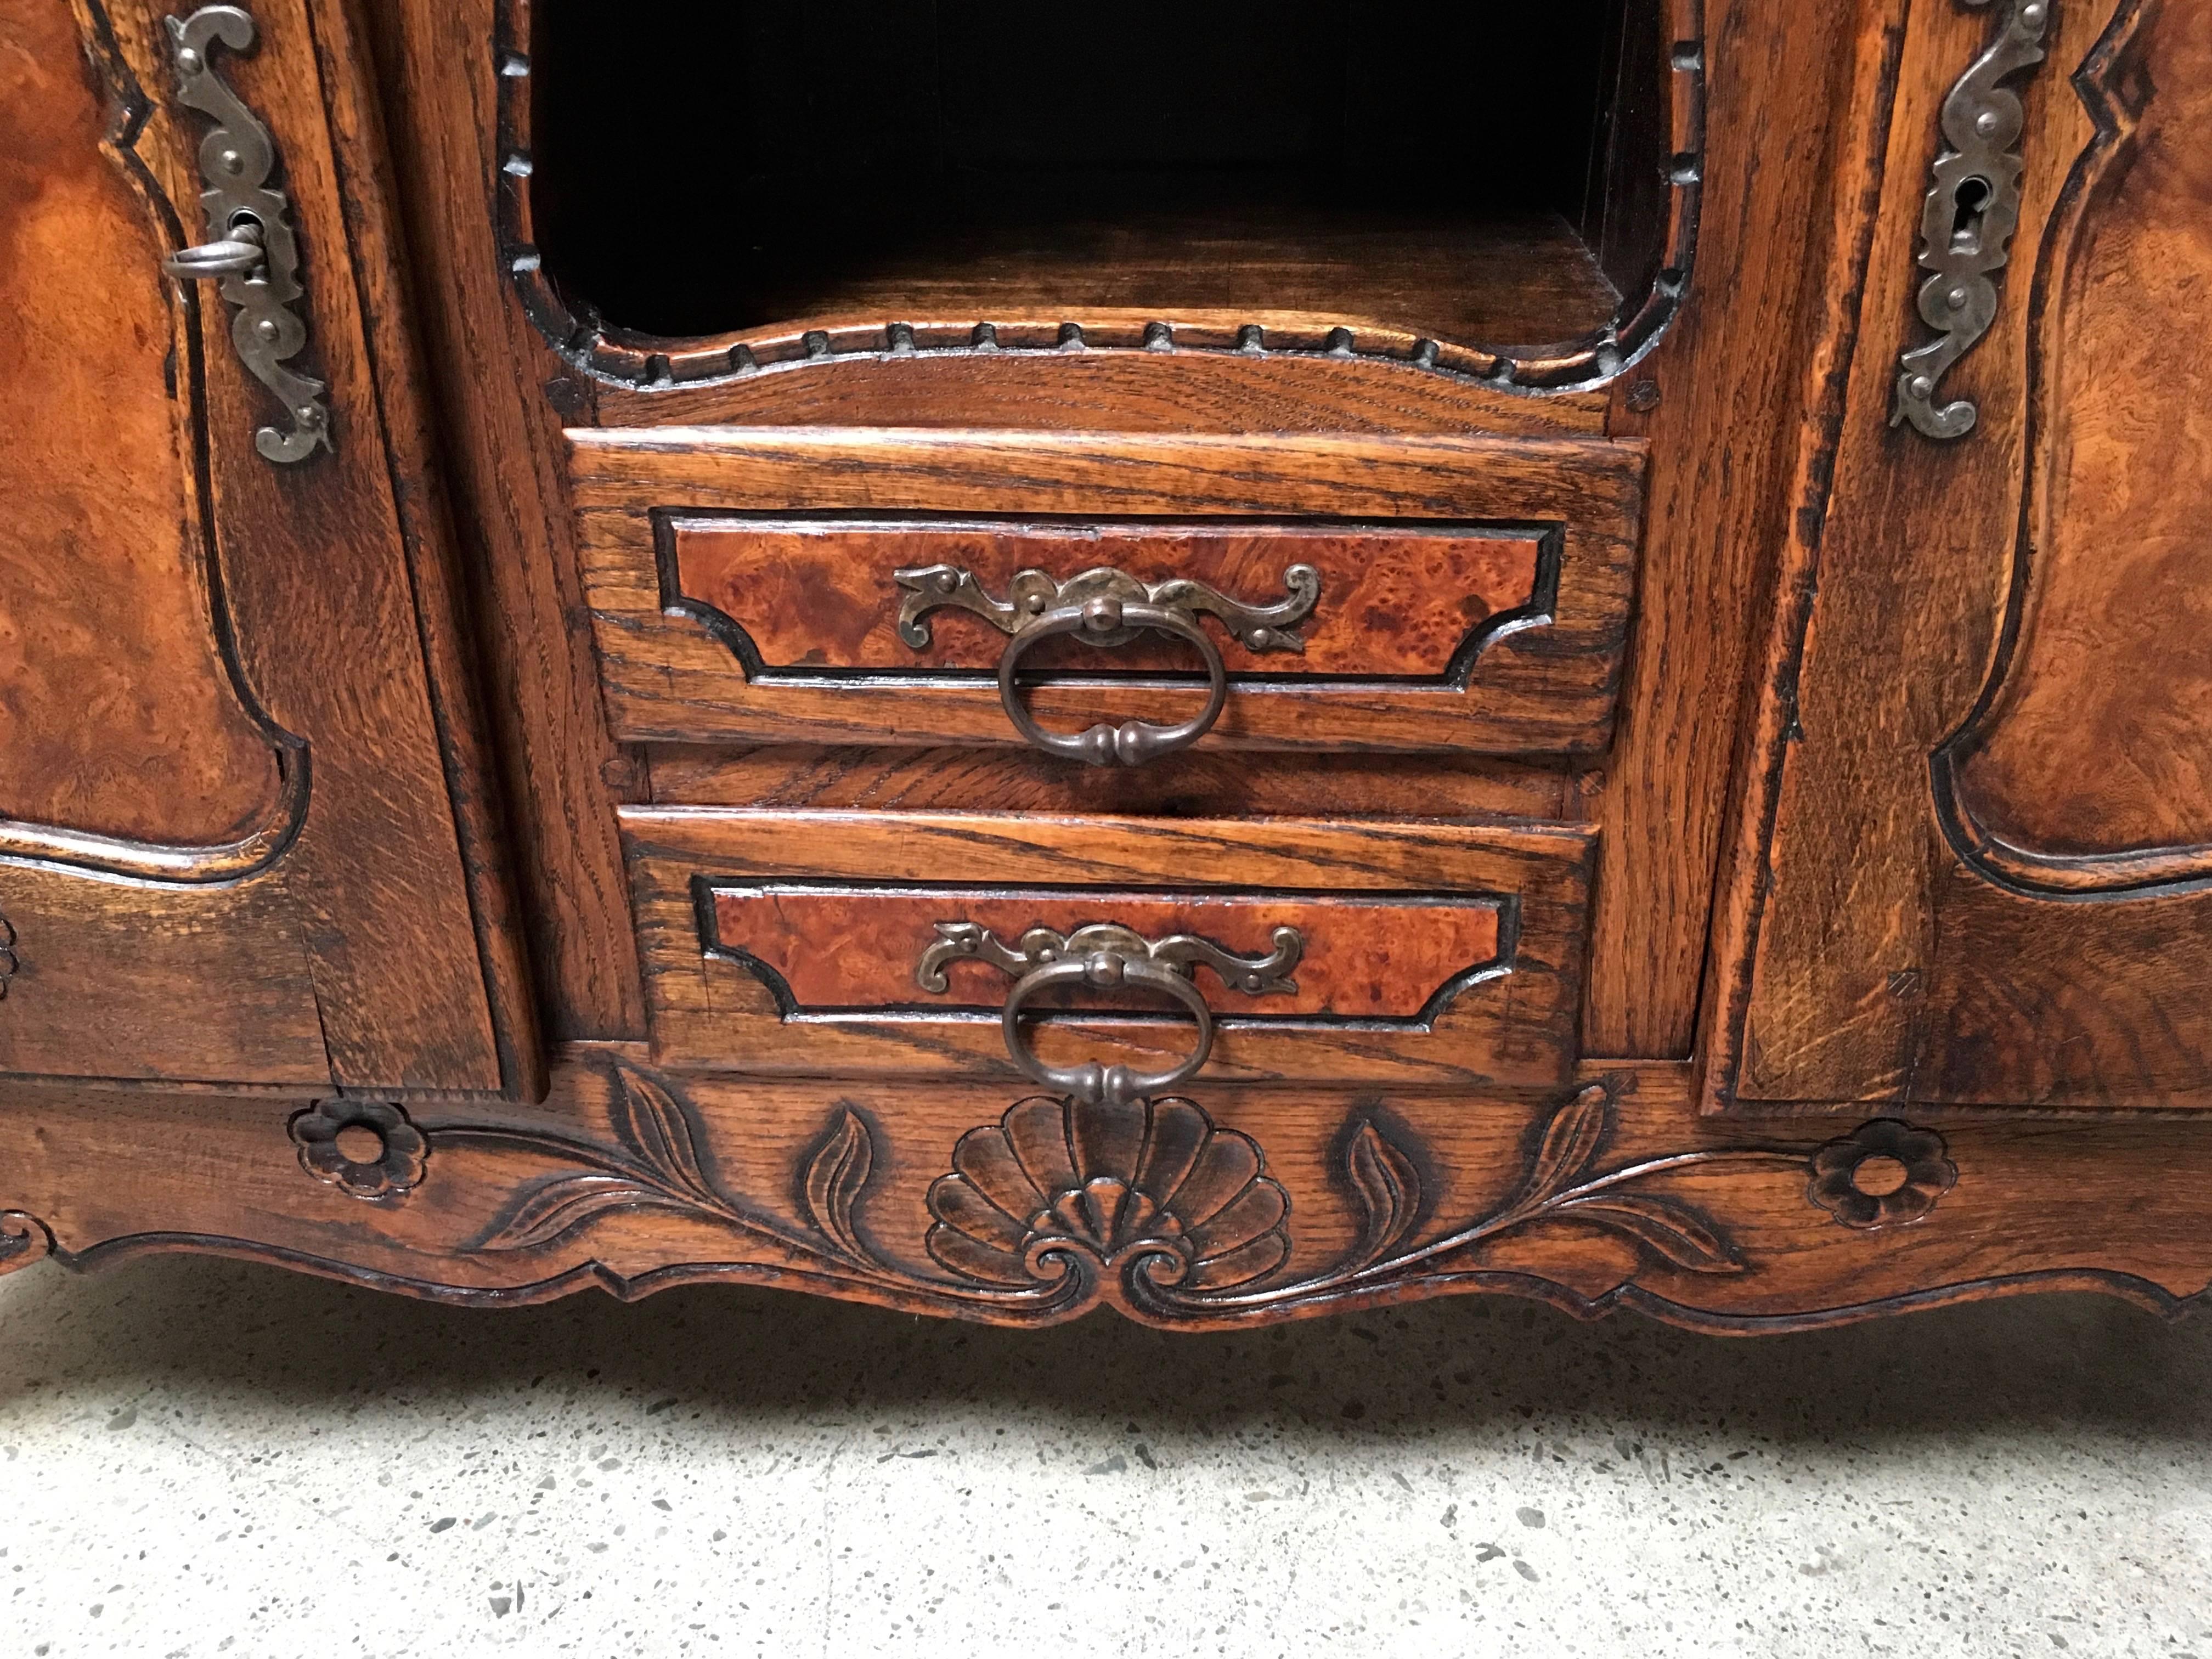 Hand-Carved 19th Century Rustic Buffet with Burl Wood Panels